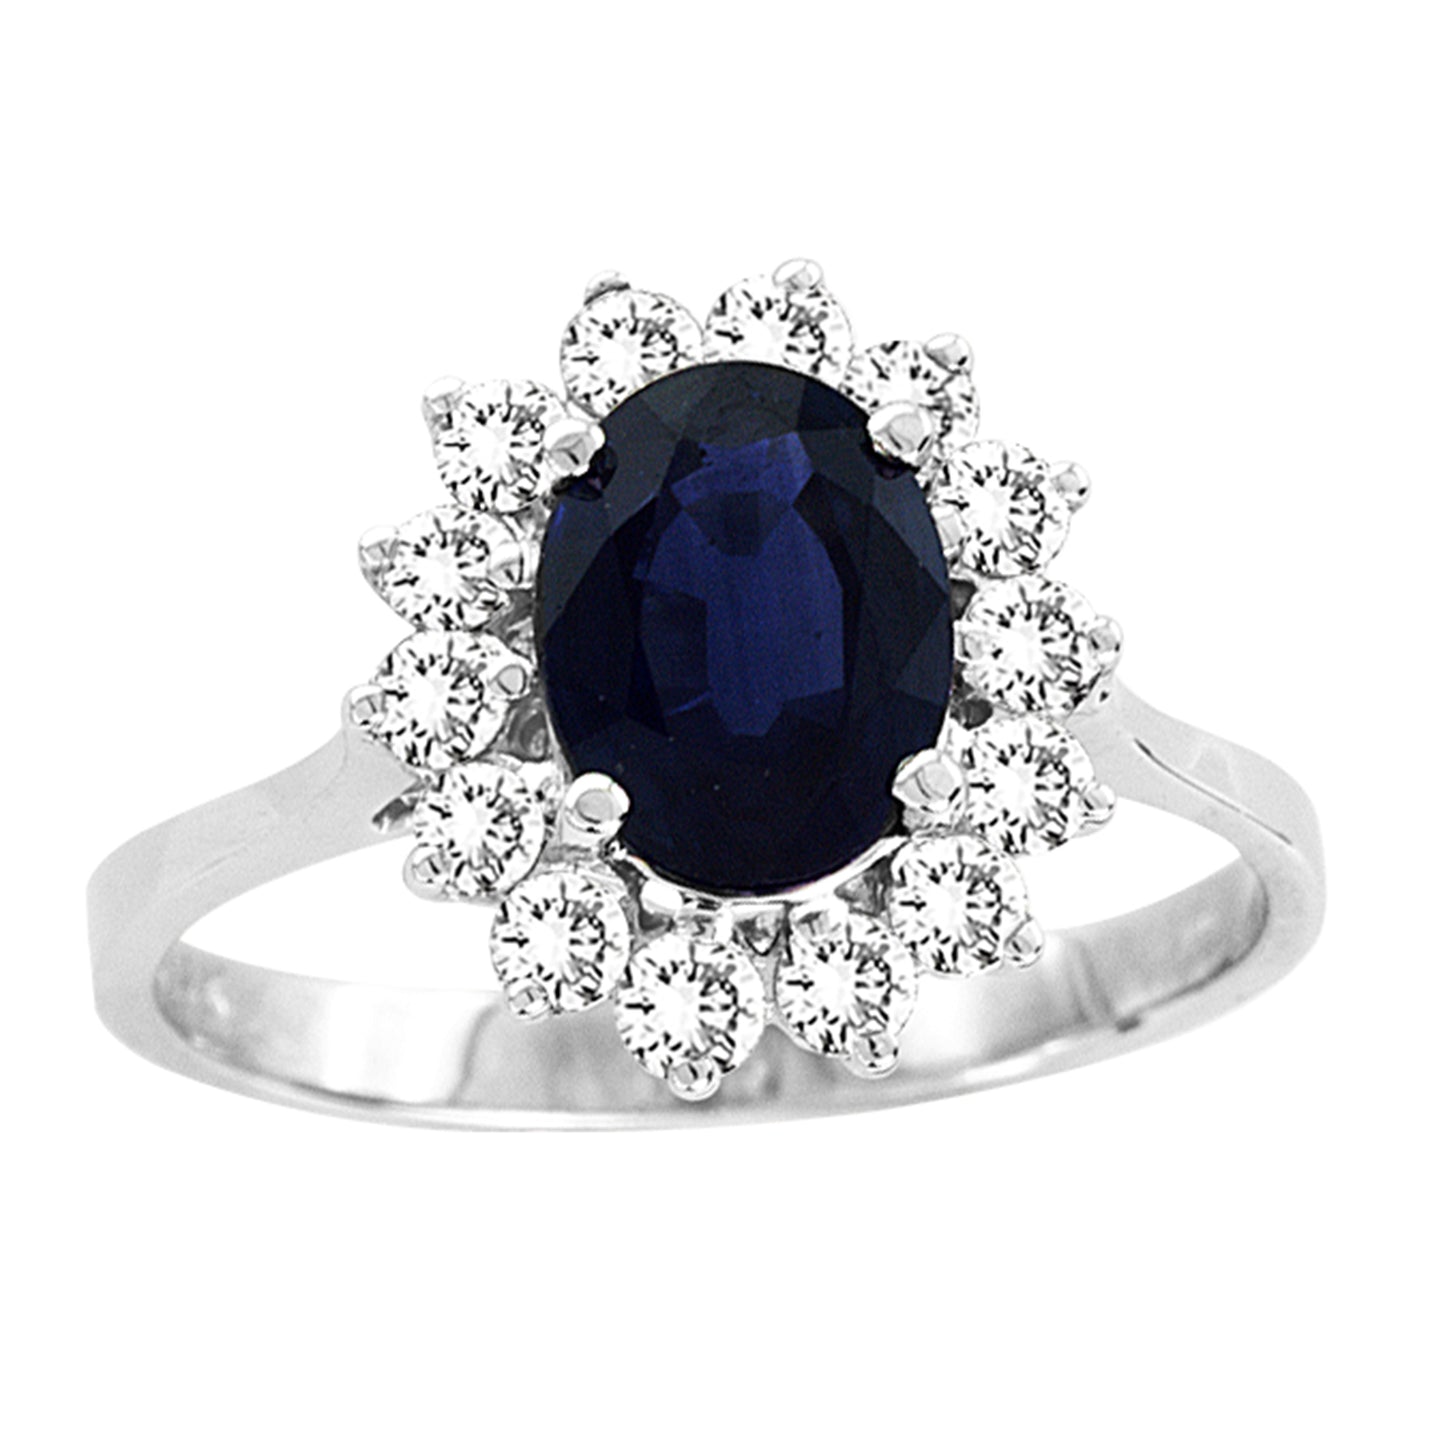 1 7/9ct Blue Sapphire & Diamond Engagement Ring in 14k White Gold